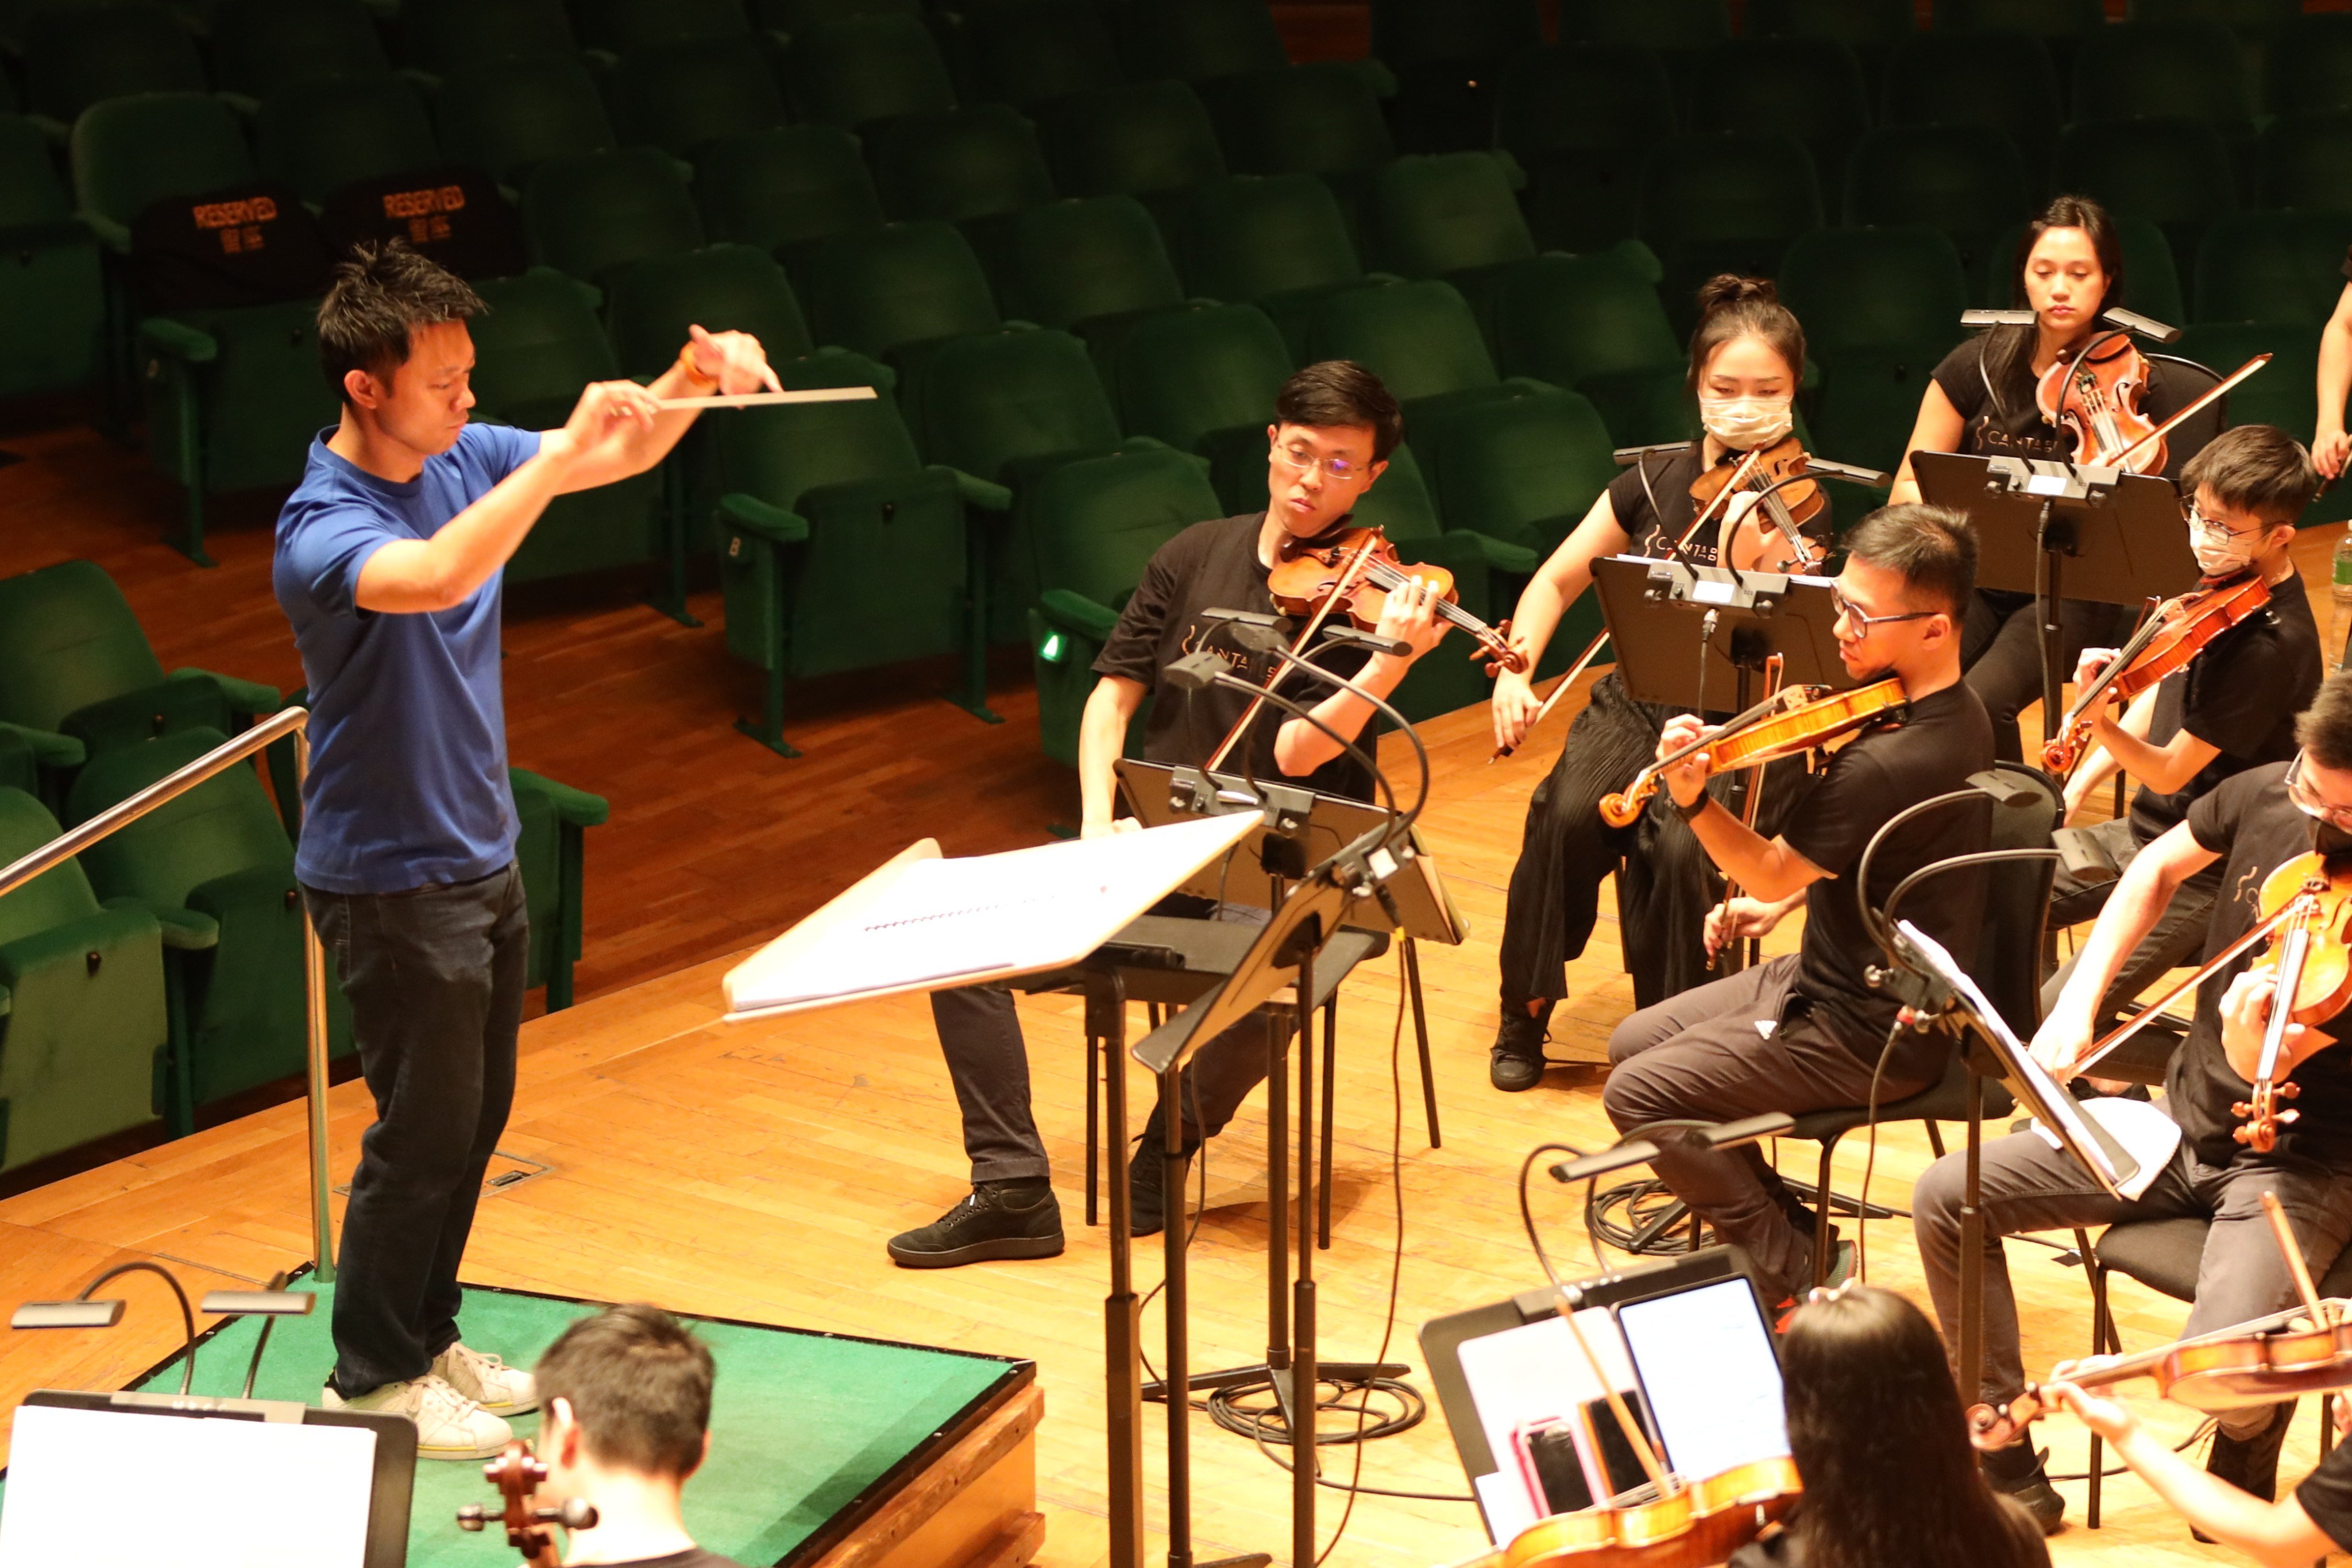 Philip Chu Chun-hei leads young musicians through Cantabile while working in the family garment business. Photo: Handout